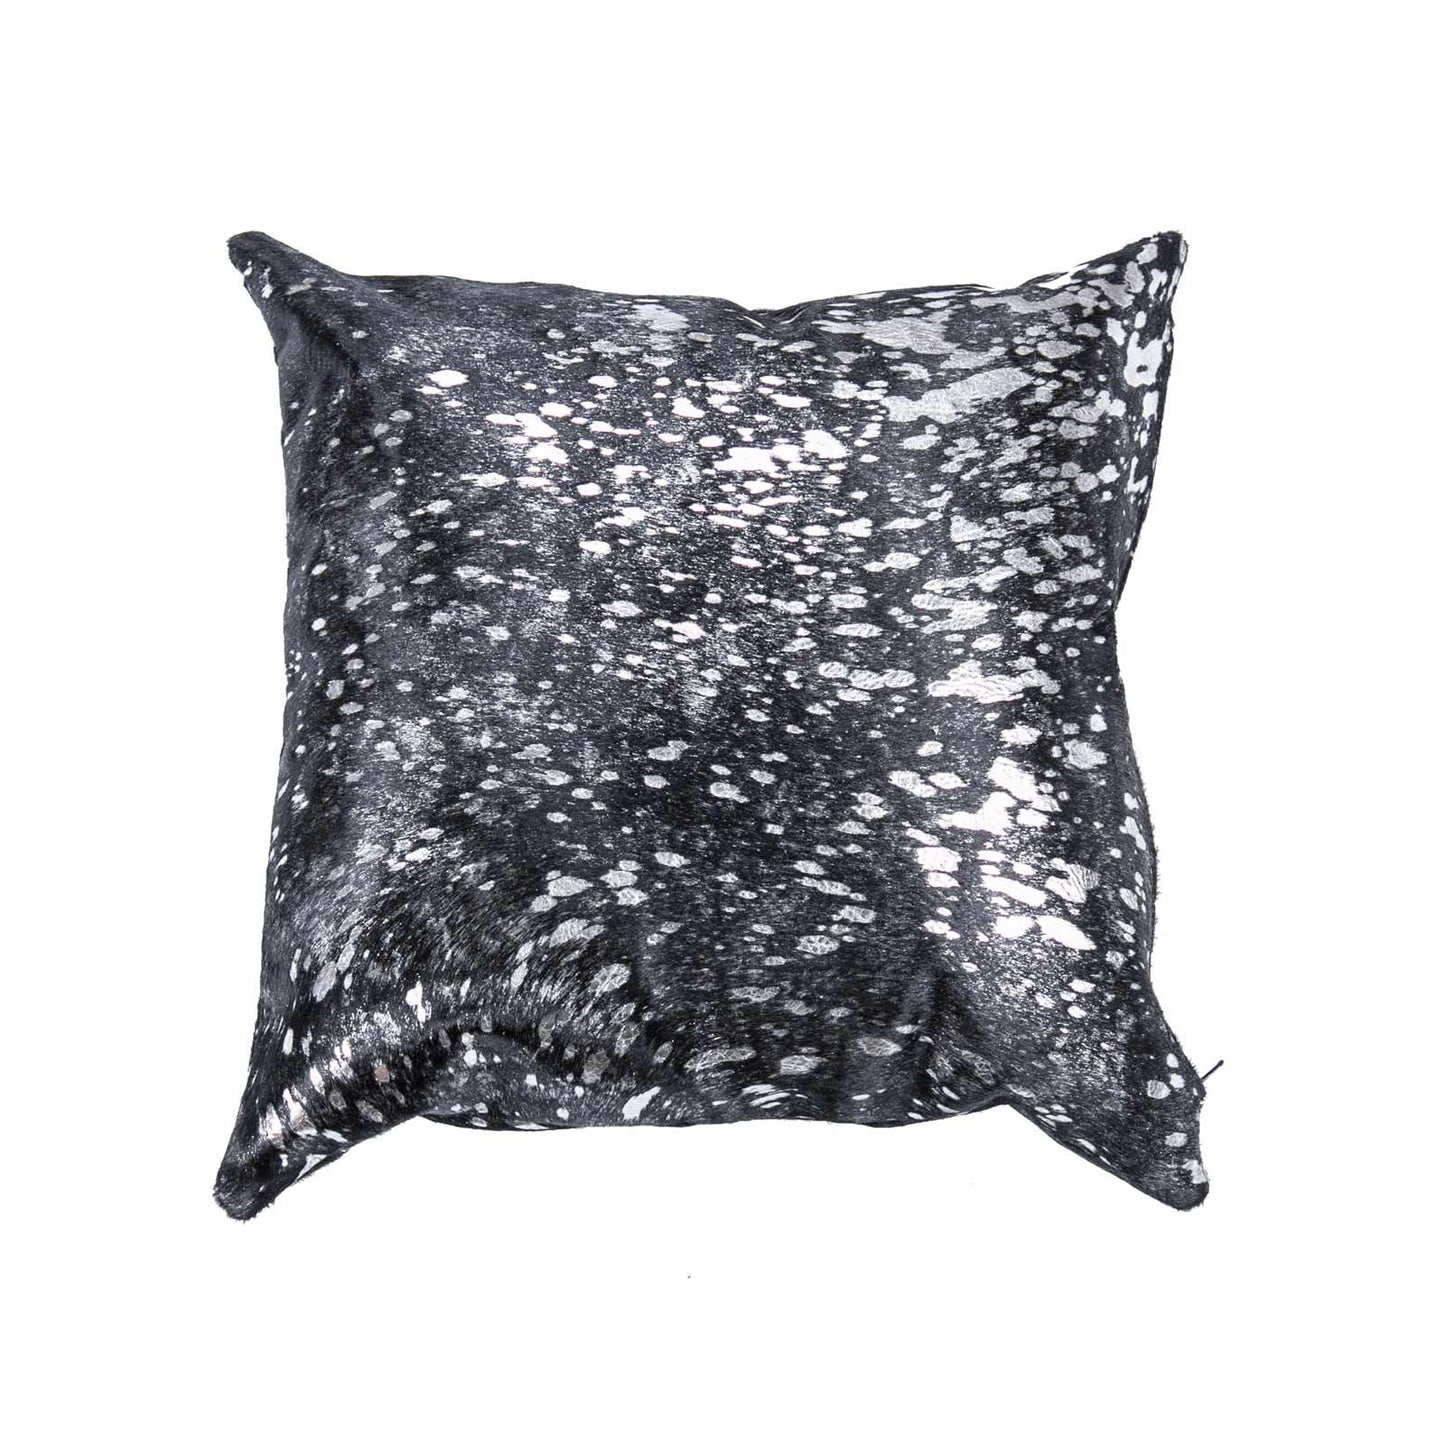 Silver on Black Based Double Sided Pillow Case - Rodeo Cowhide Rugs17x 17 in